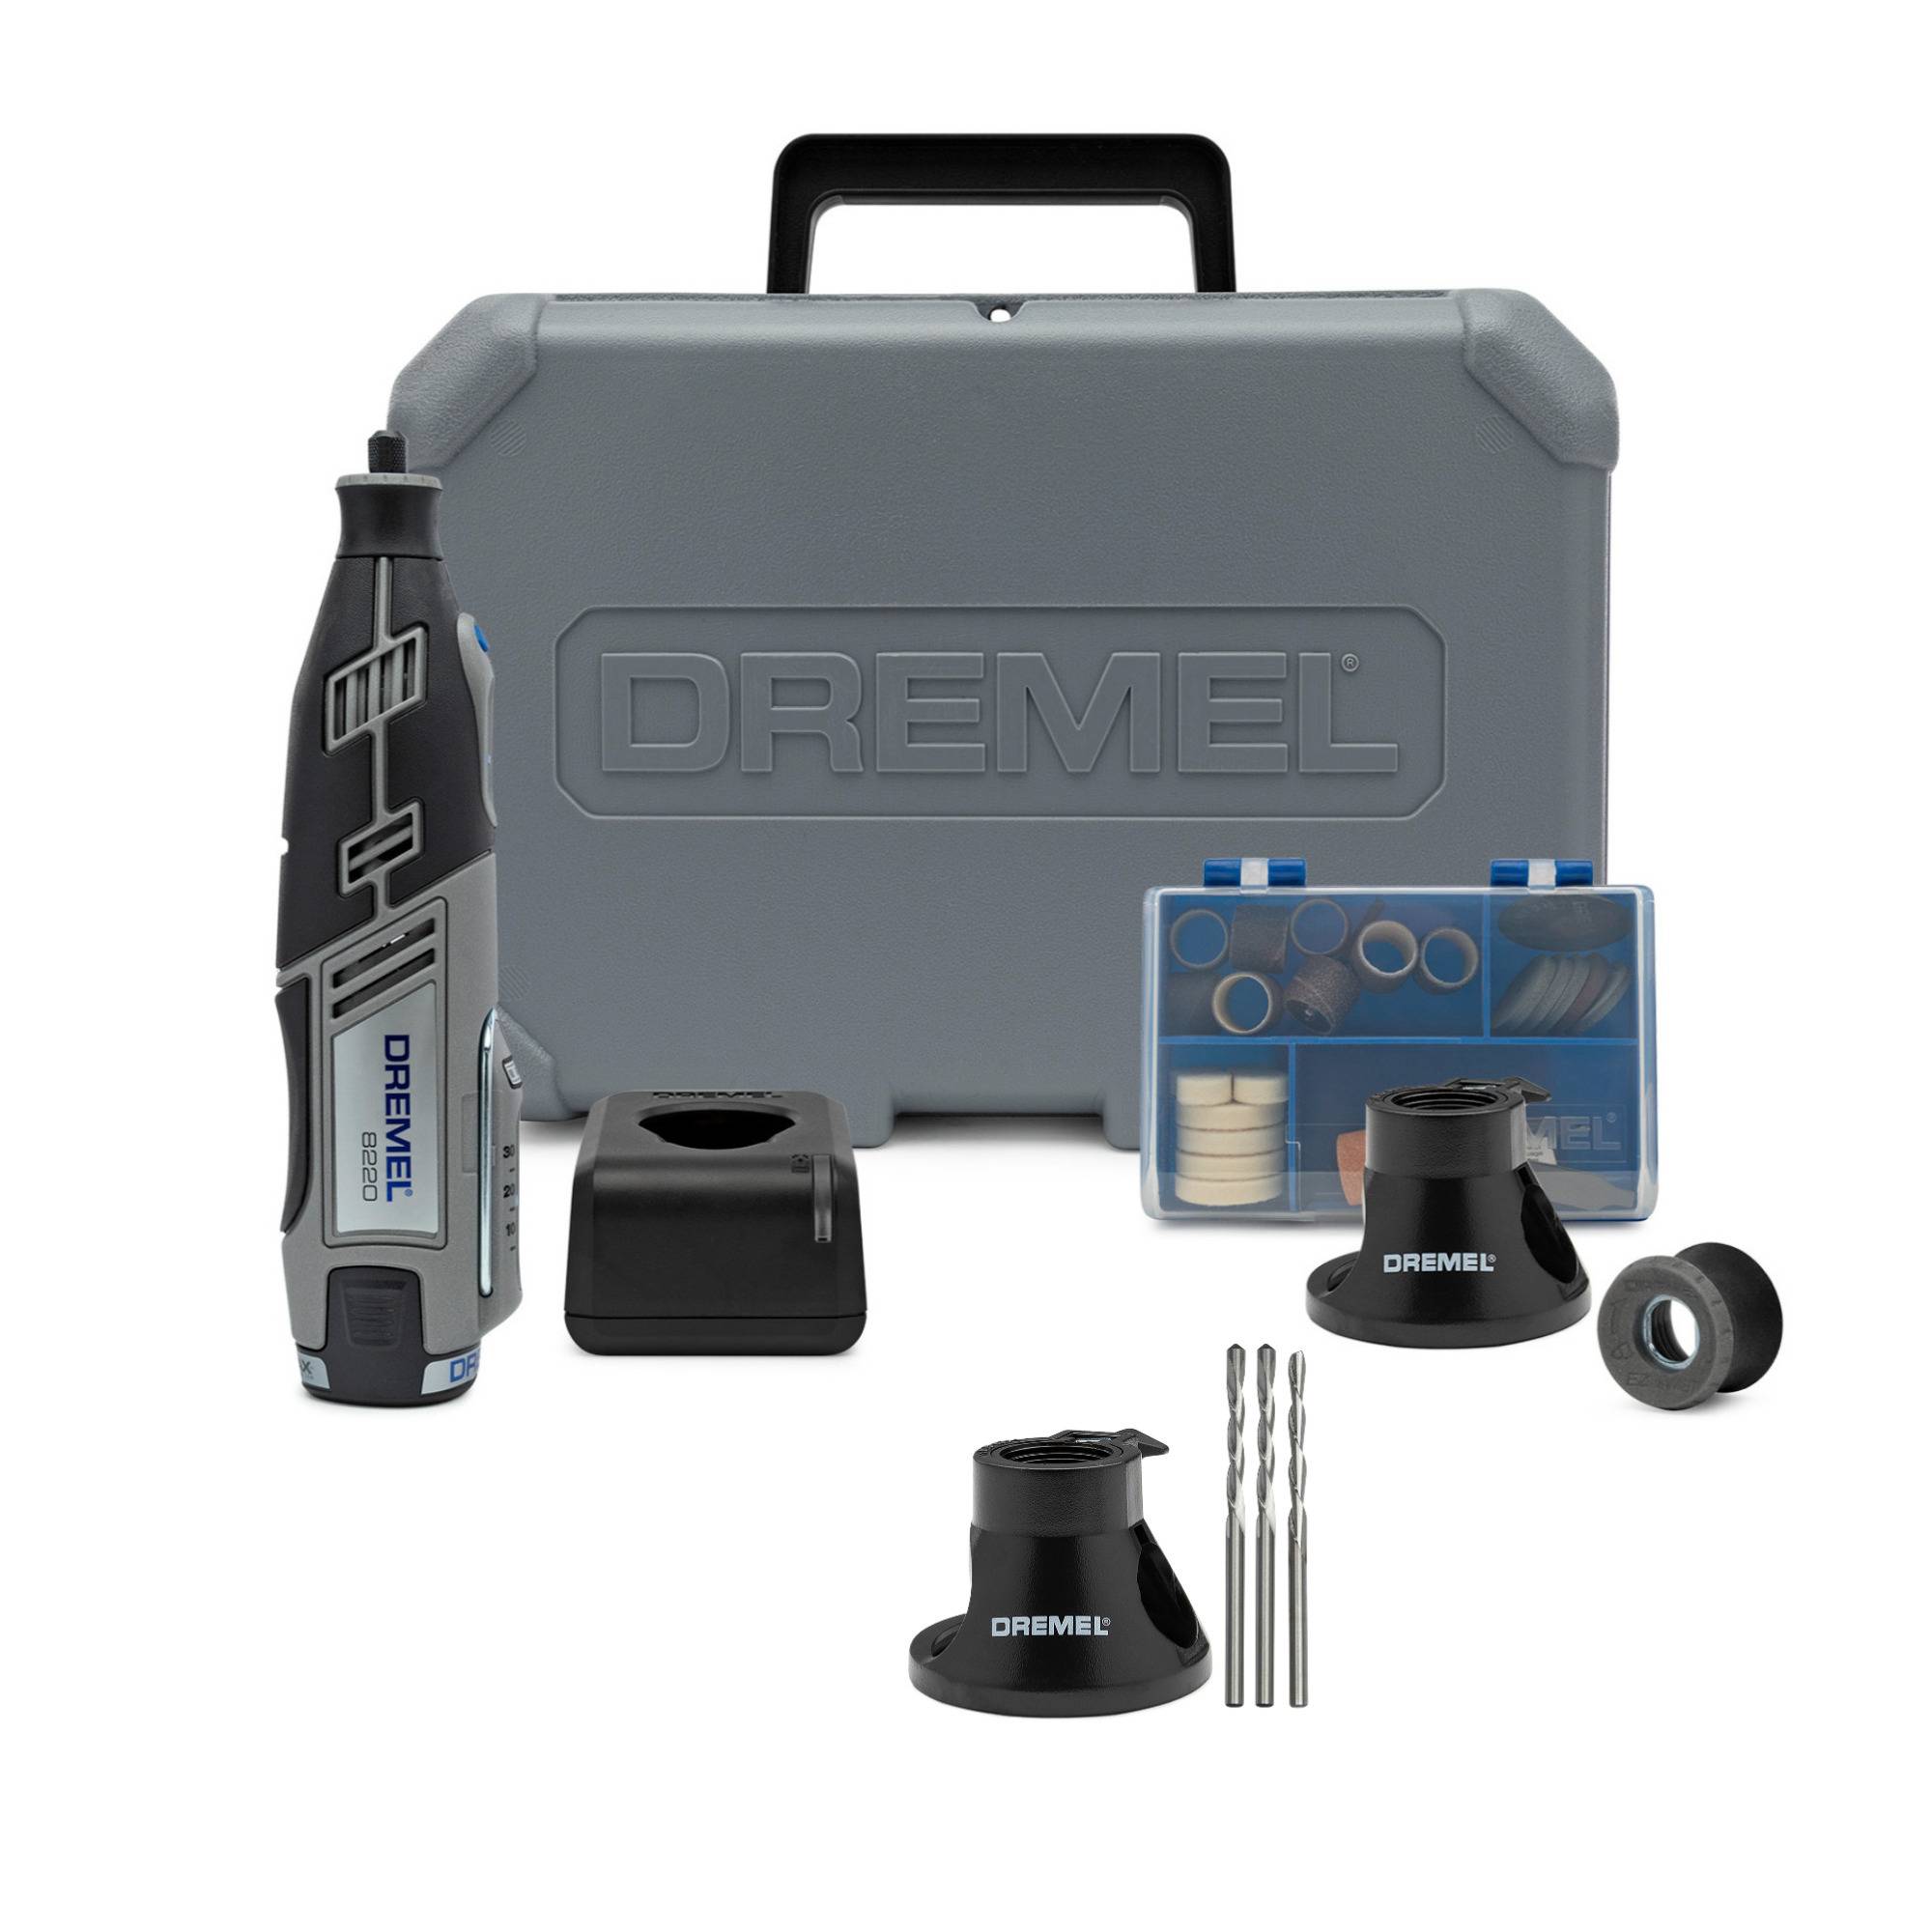 Dremel 8220 Series 12VMax Cordless Rotary Tool with Multi-Purpose Cutting Kit